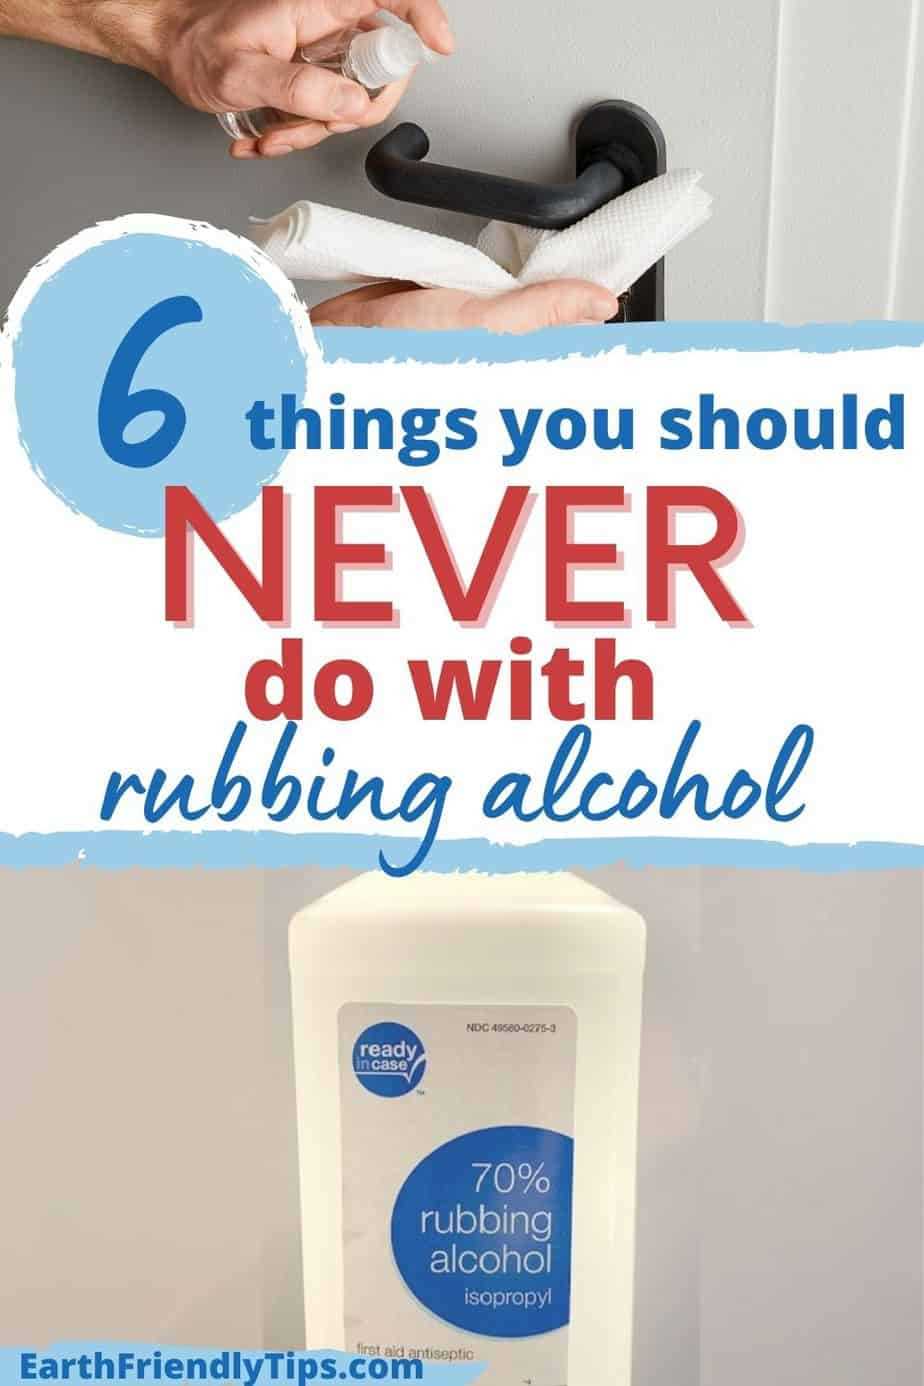 Common Mistakes to Avoid When Cleaning with Rubbing Alcohol